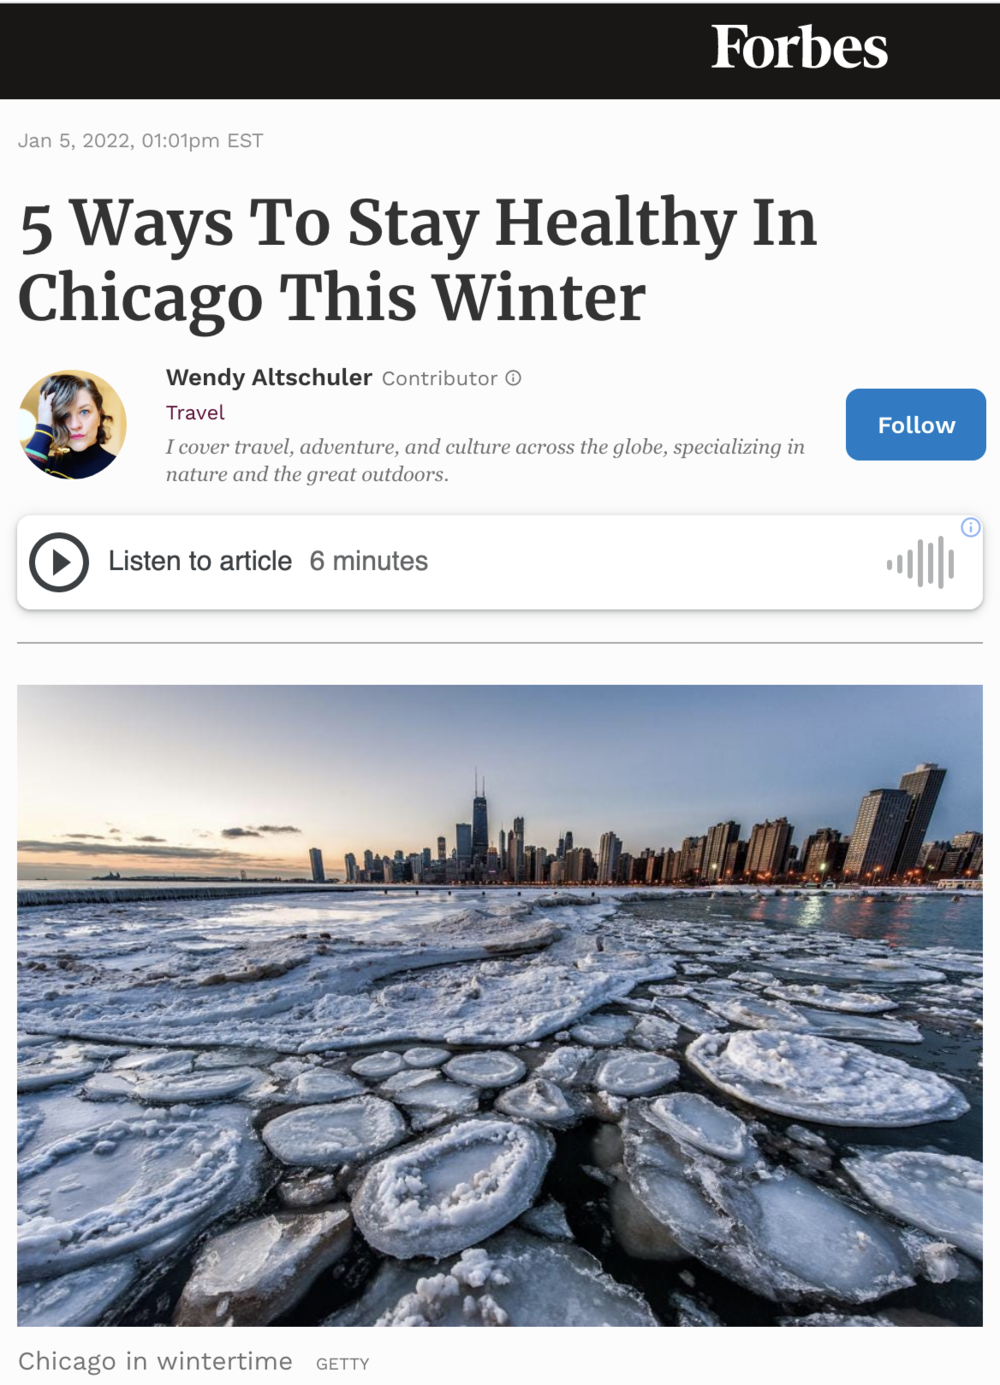 5 Ways To Stay Healthy In Chicago This Winter